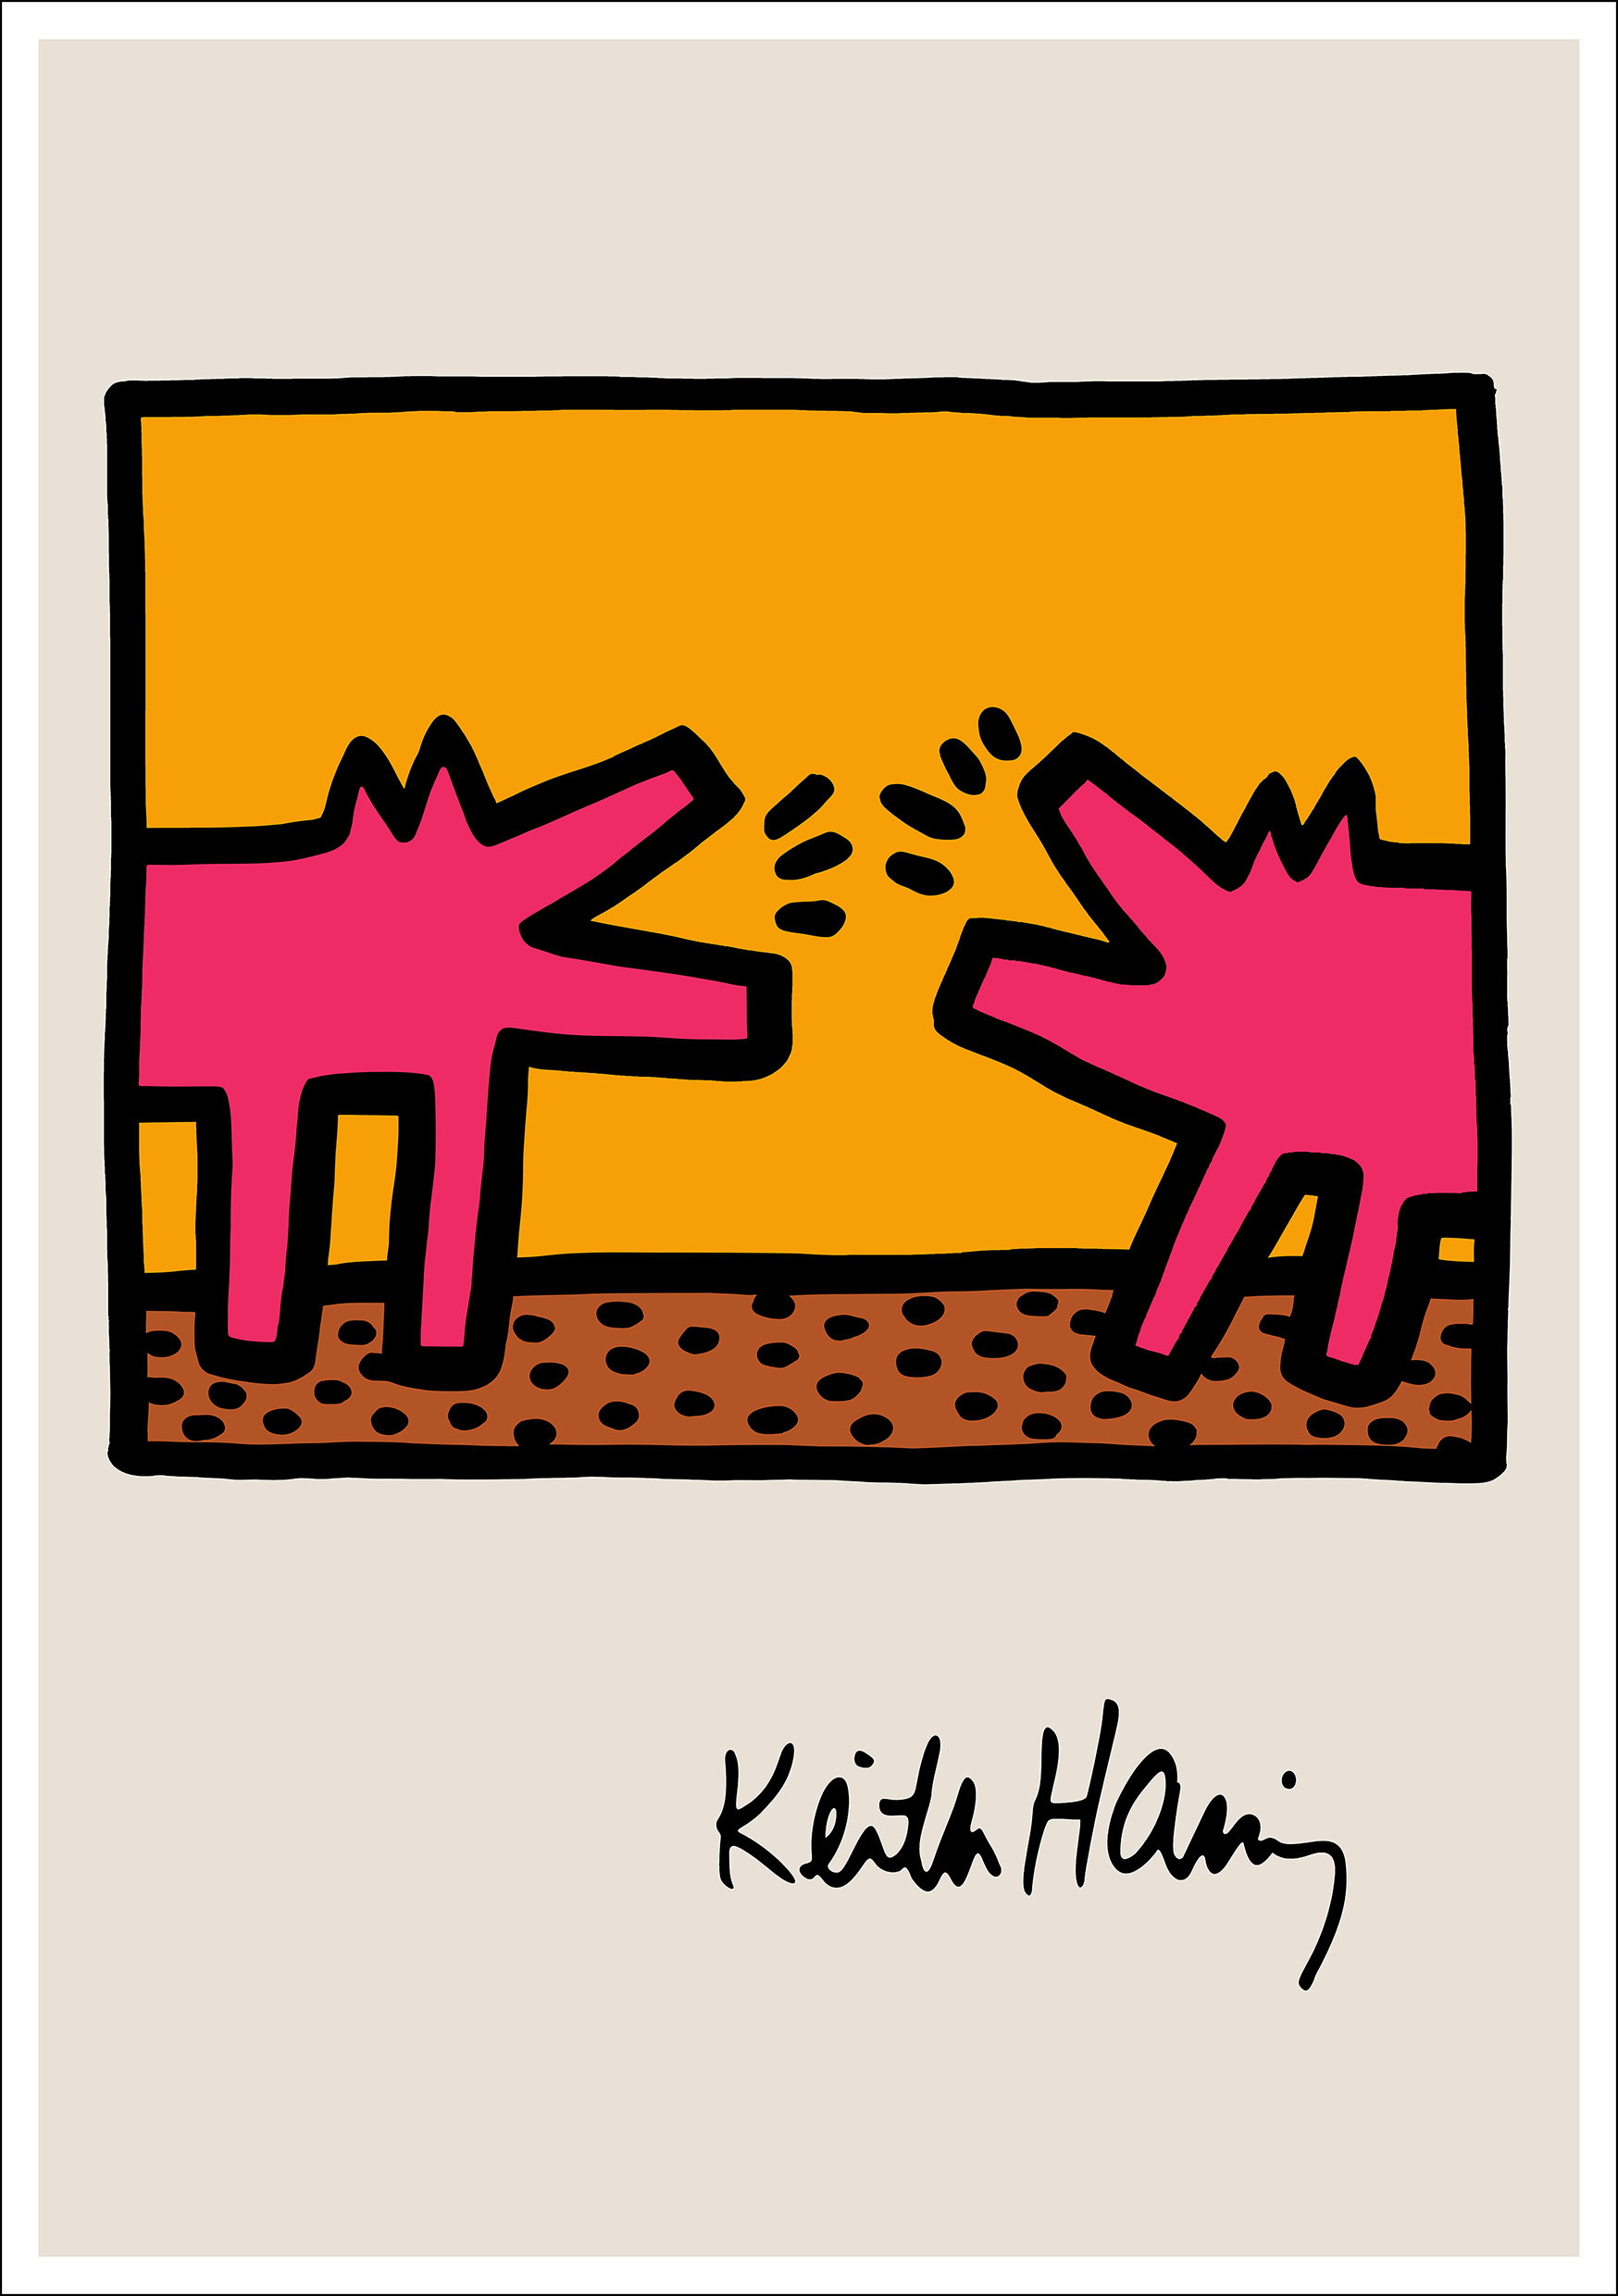 BARKING DOGS Keith Haring Poster Print Fine Art Exhibition Print